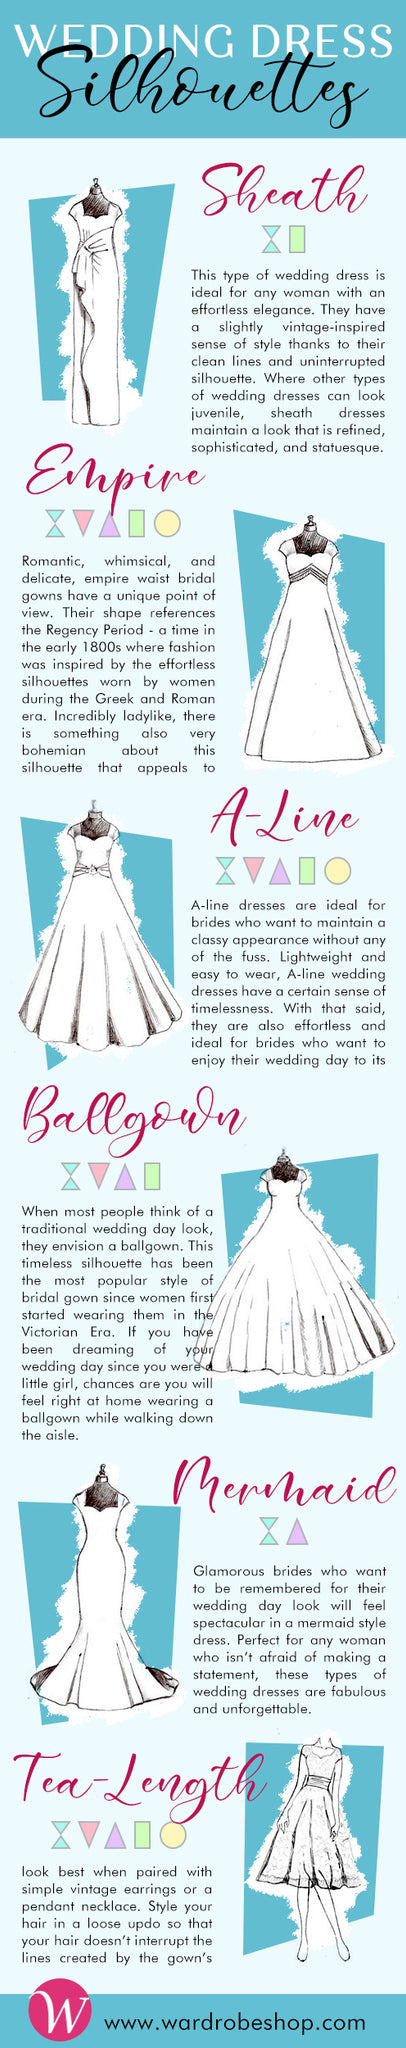 Wedding Dress Silhouettes infographic